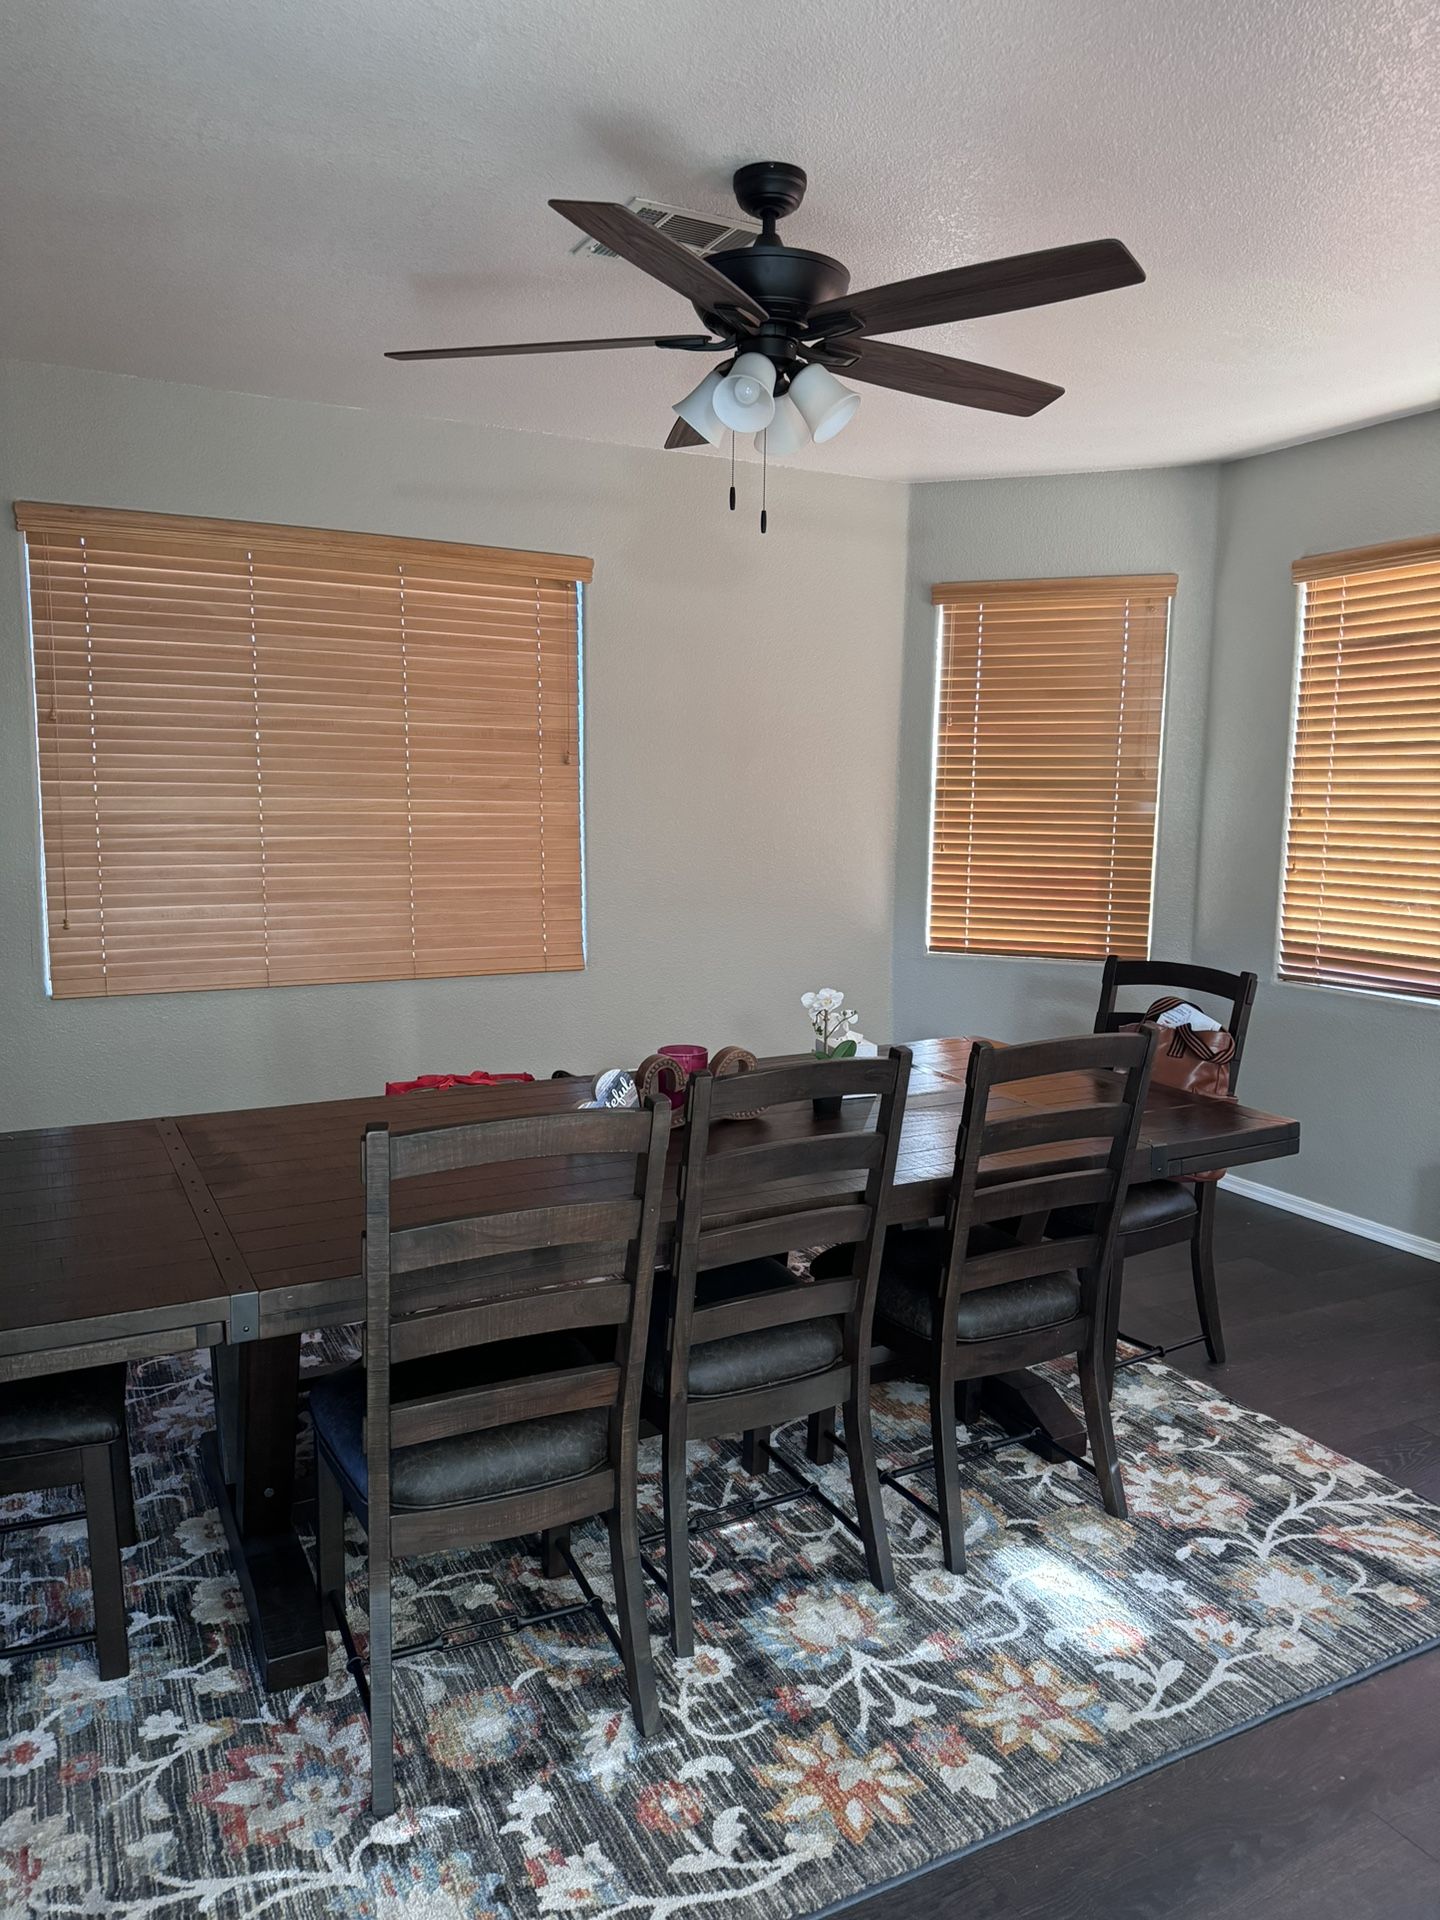 9ft Long Dining Room Table And Chairs